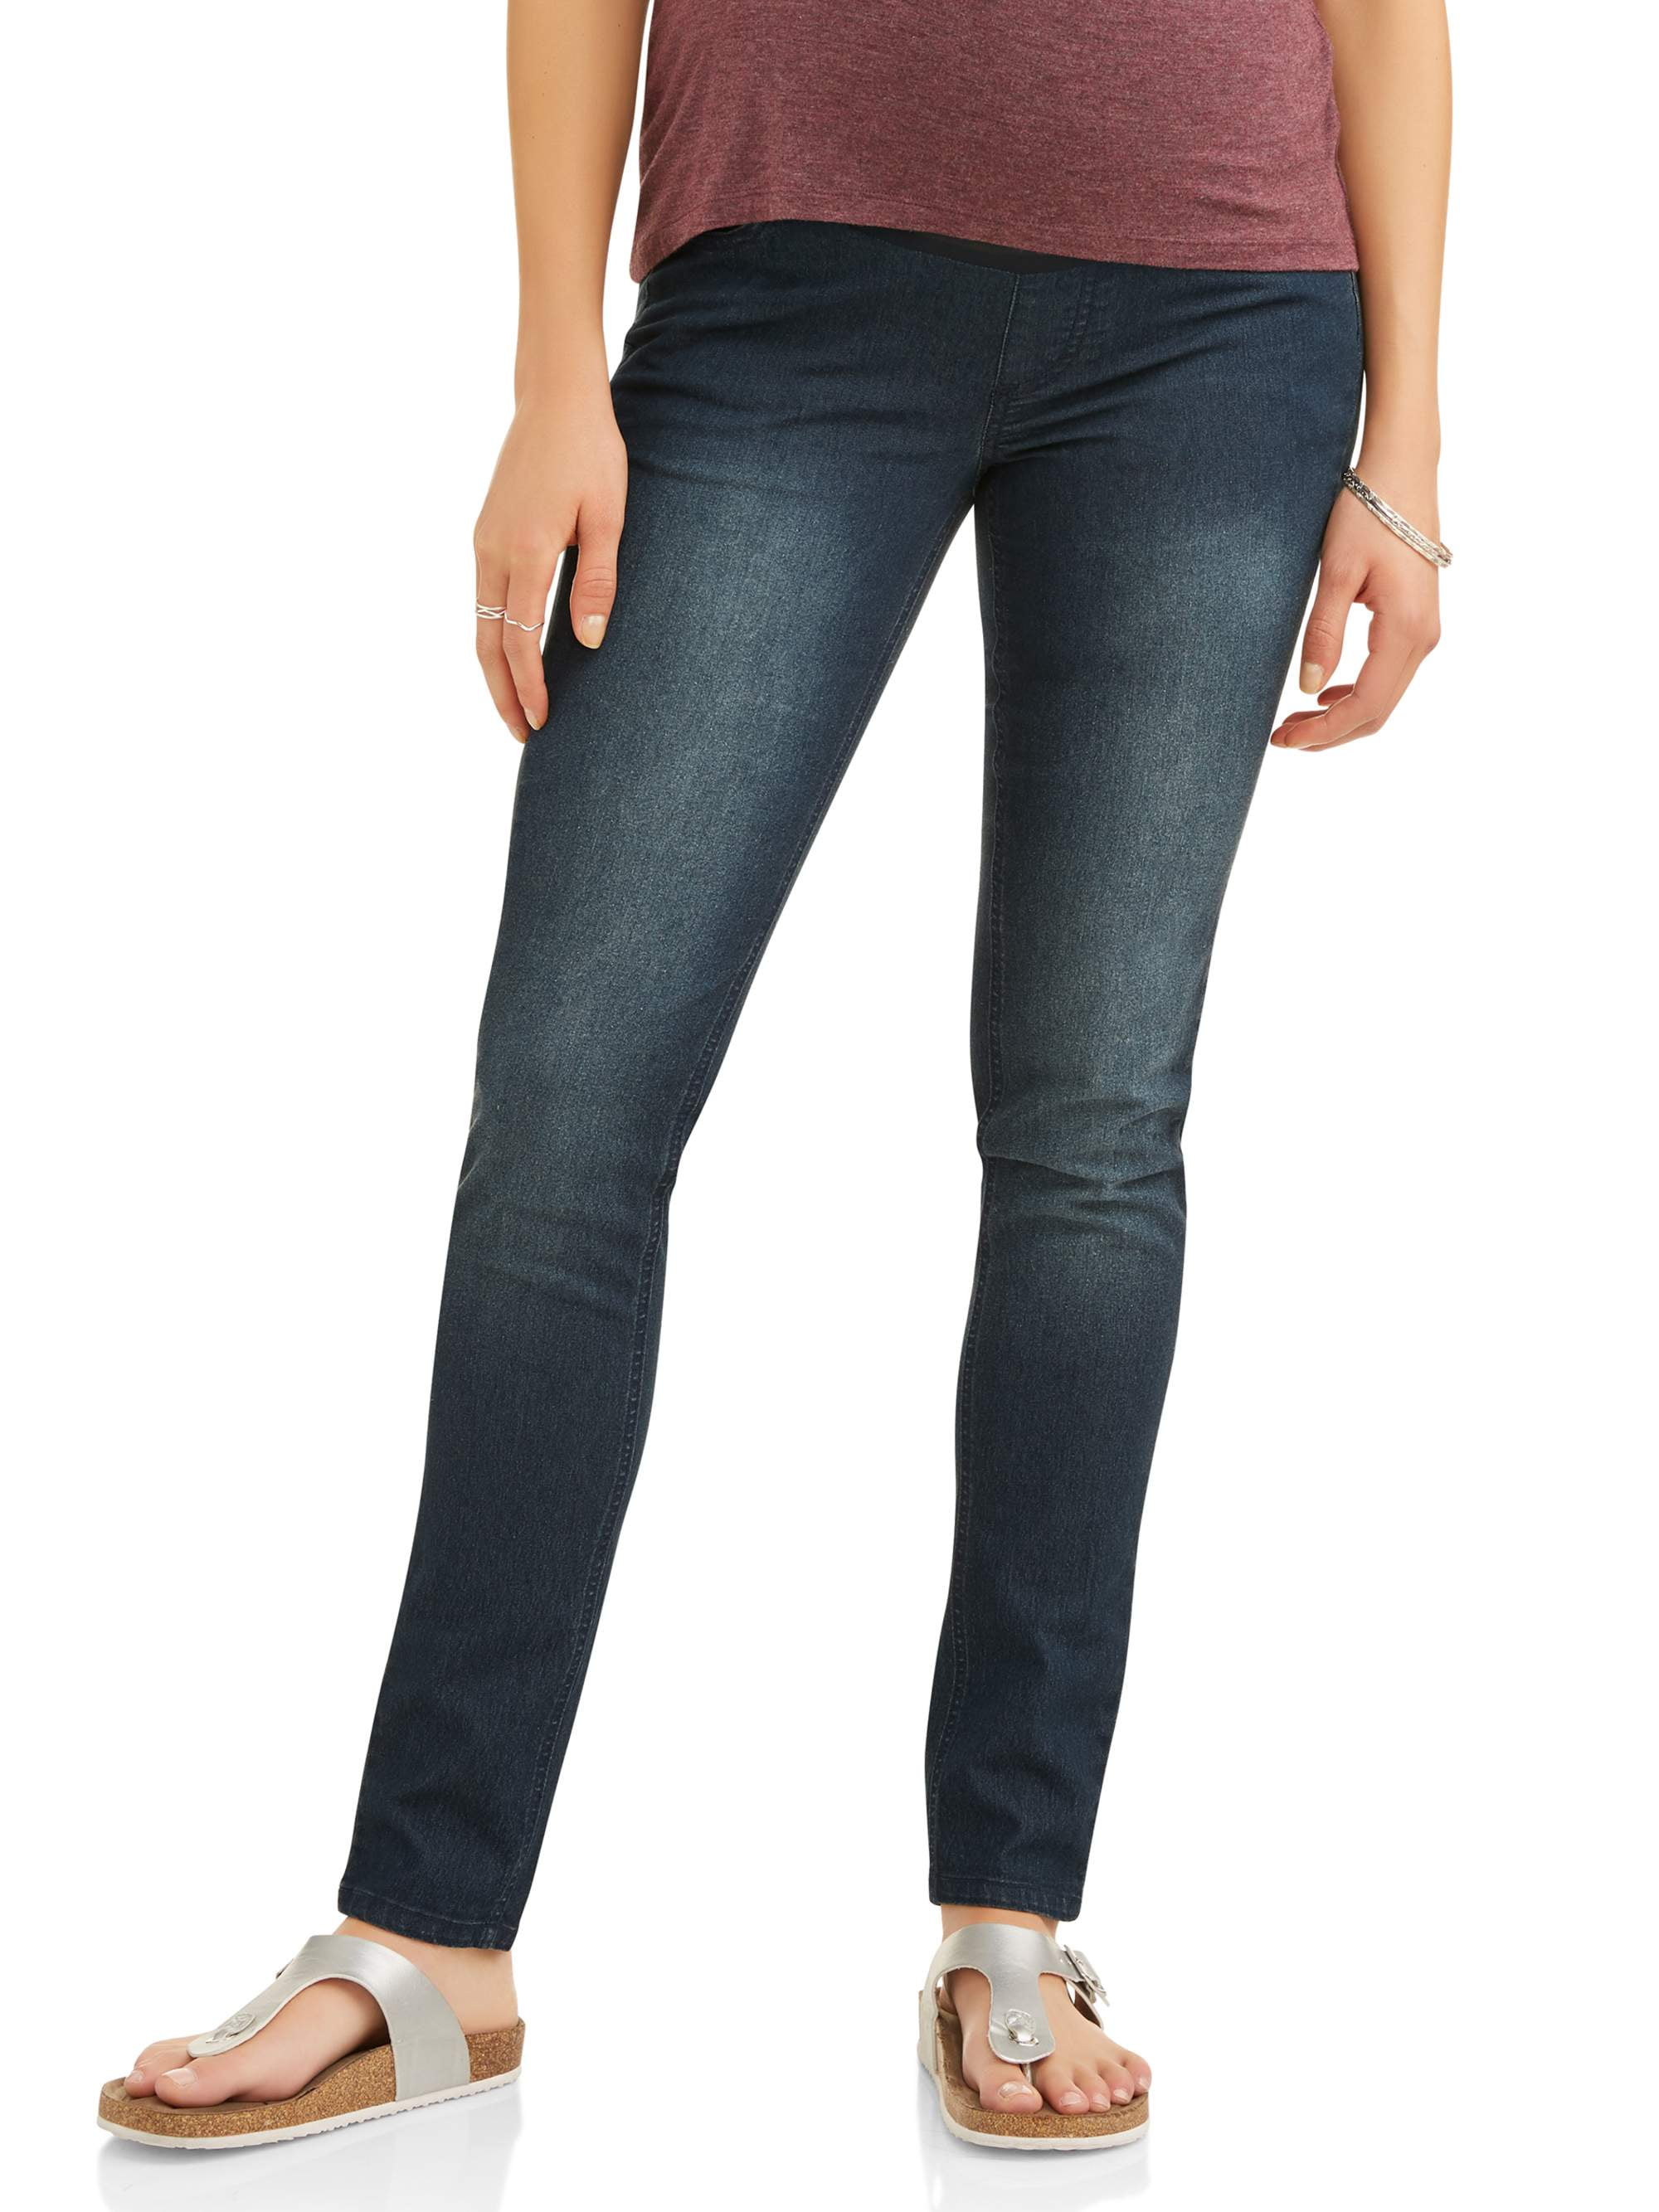 Rollback in Maternity Jeans